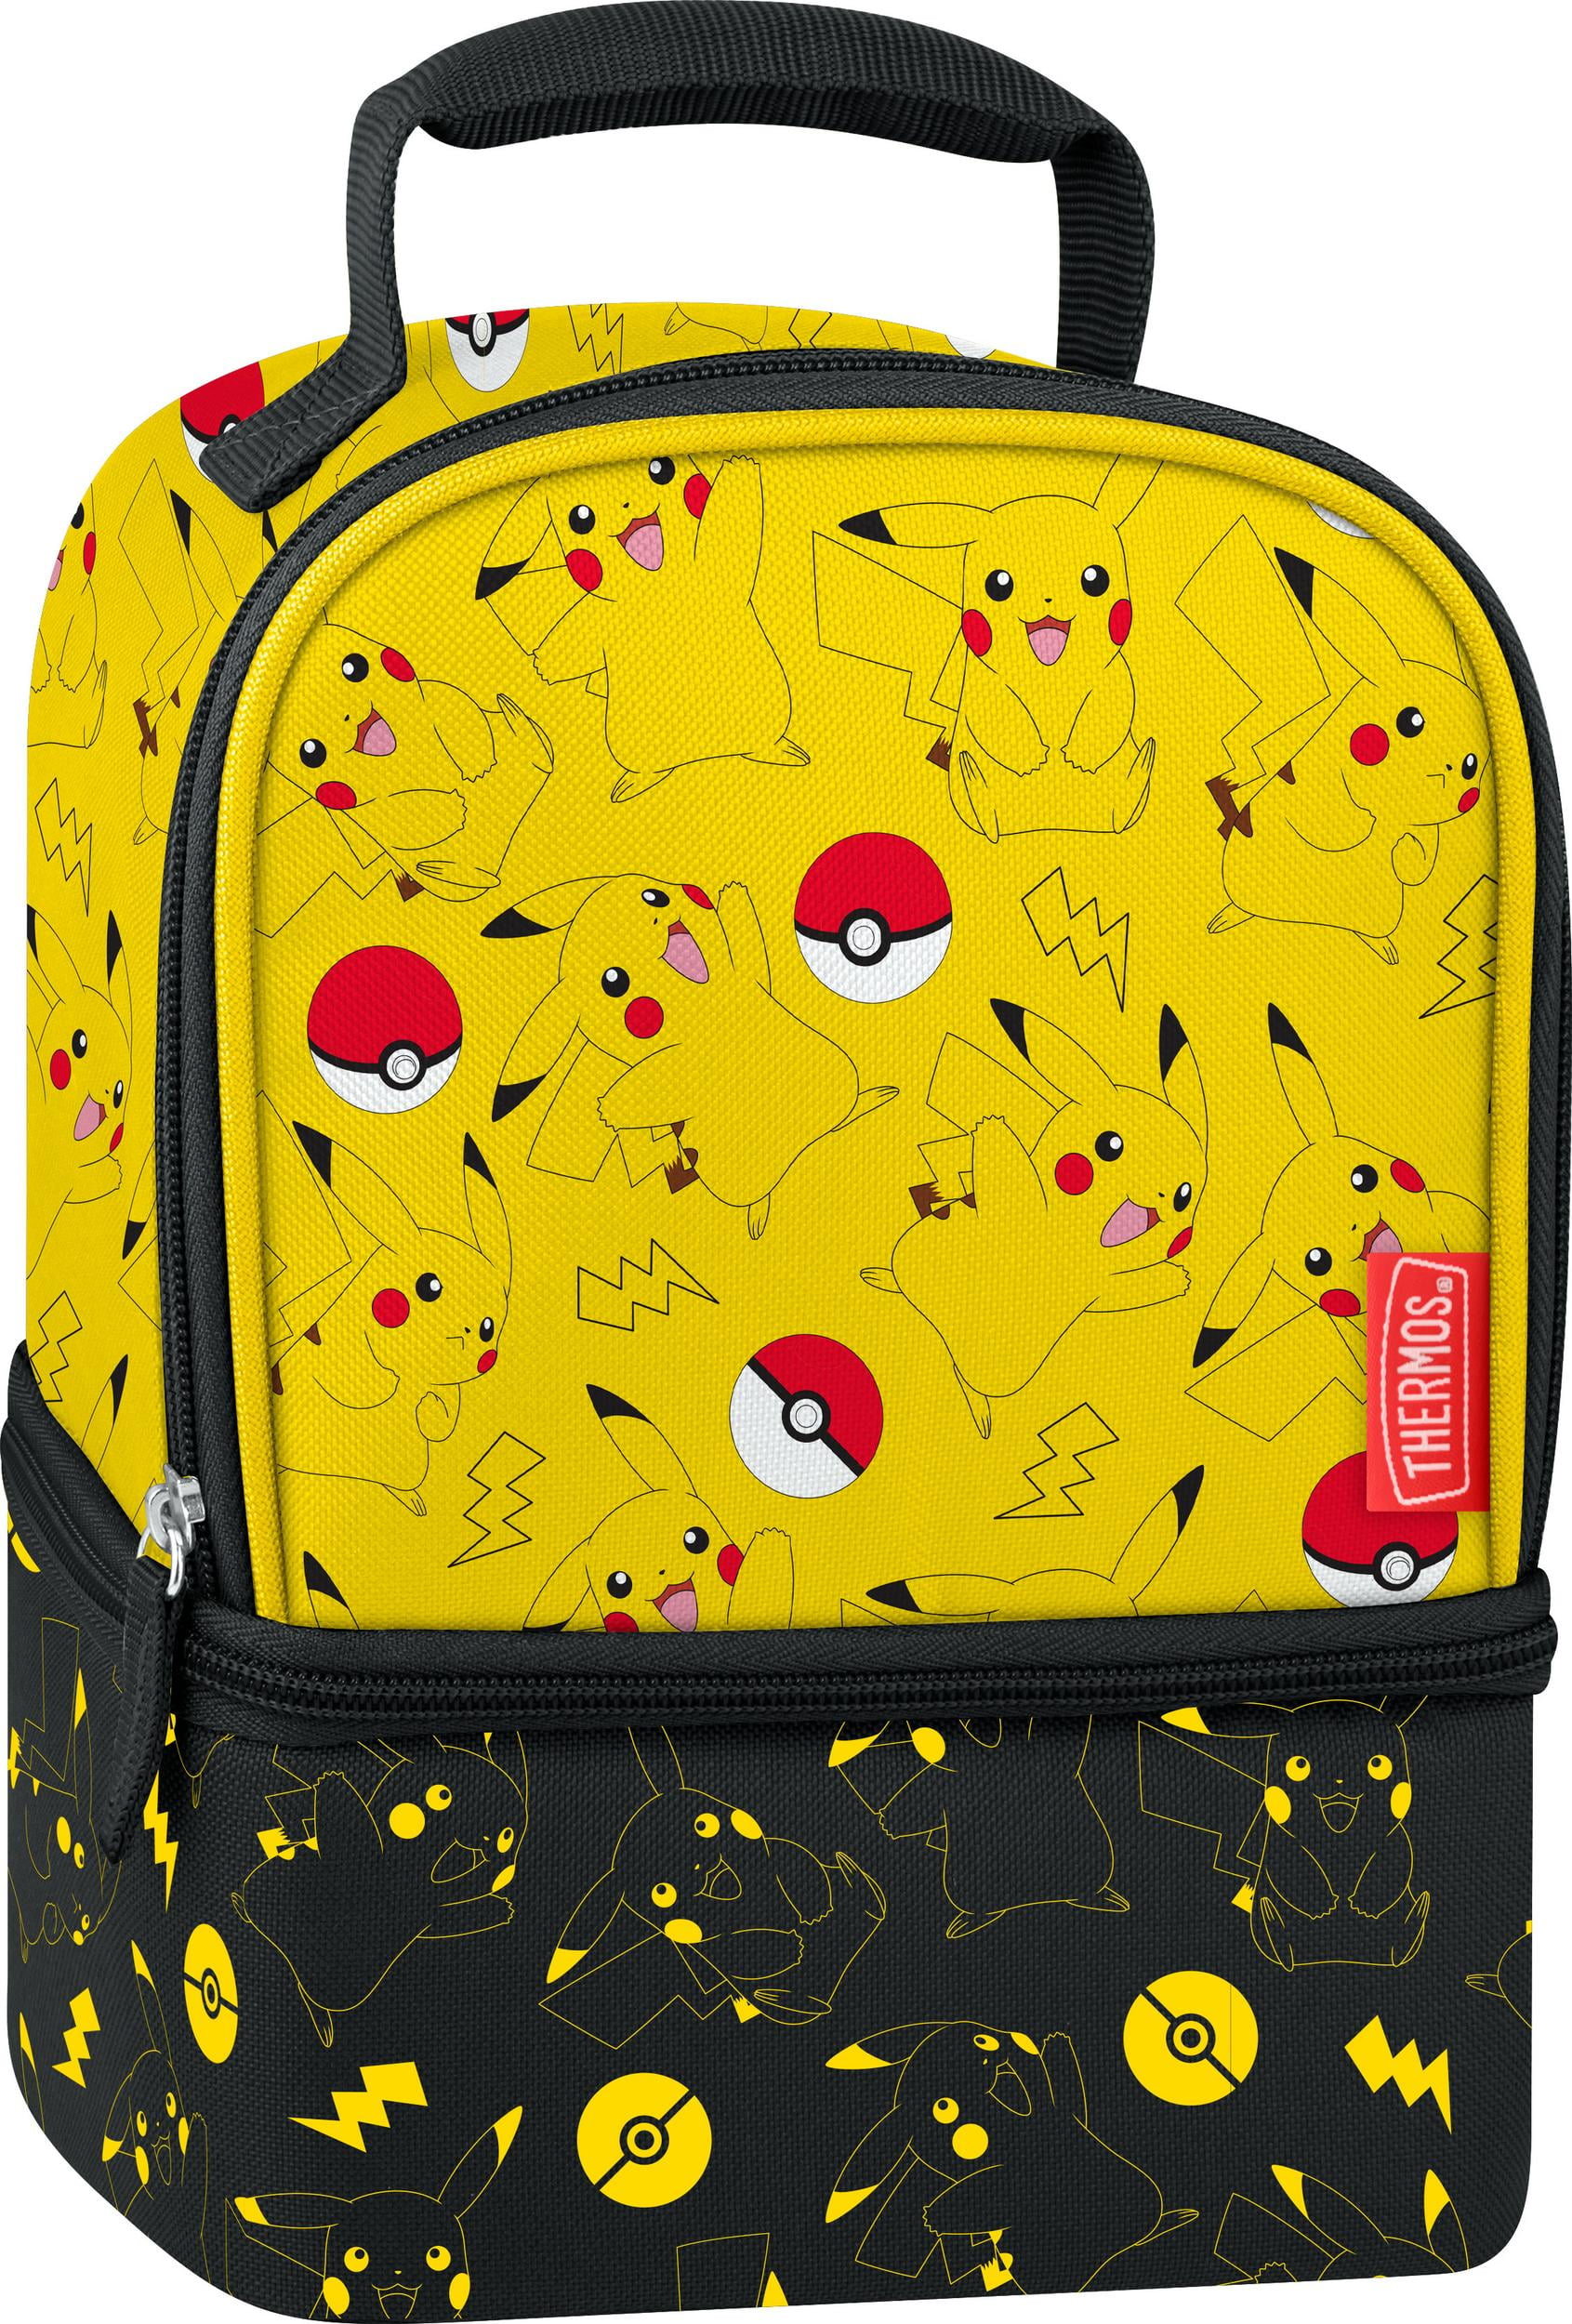 Vintage 2001 Pokemon Lunch Bag Lunchbag, Insulated, Handle, Lunch